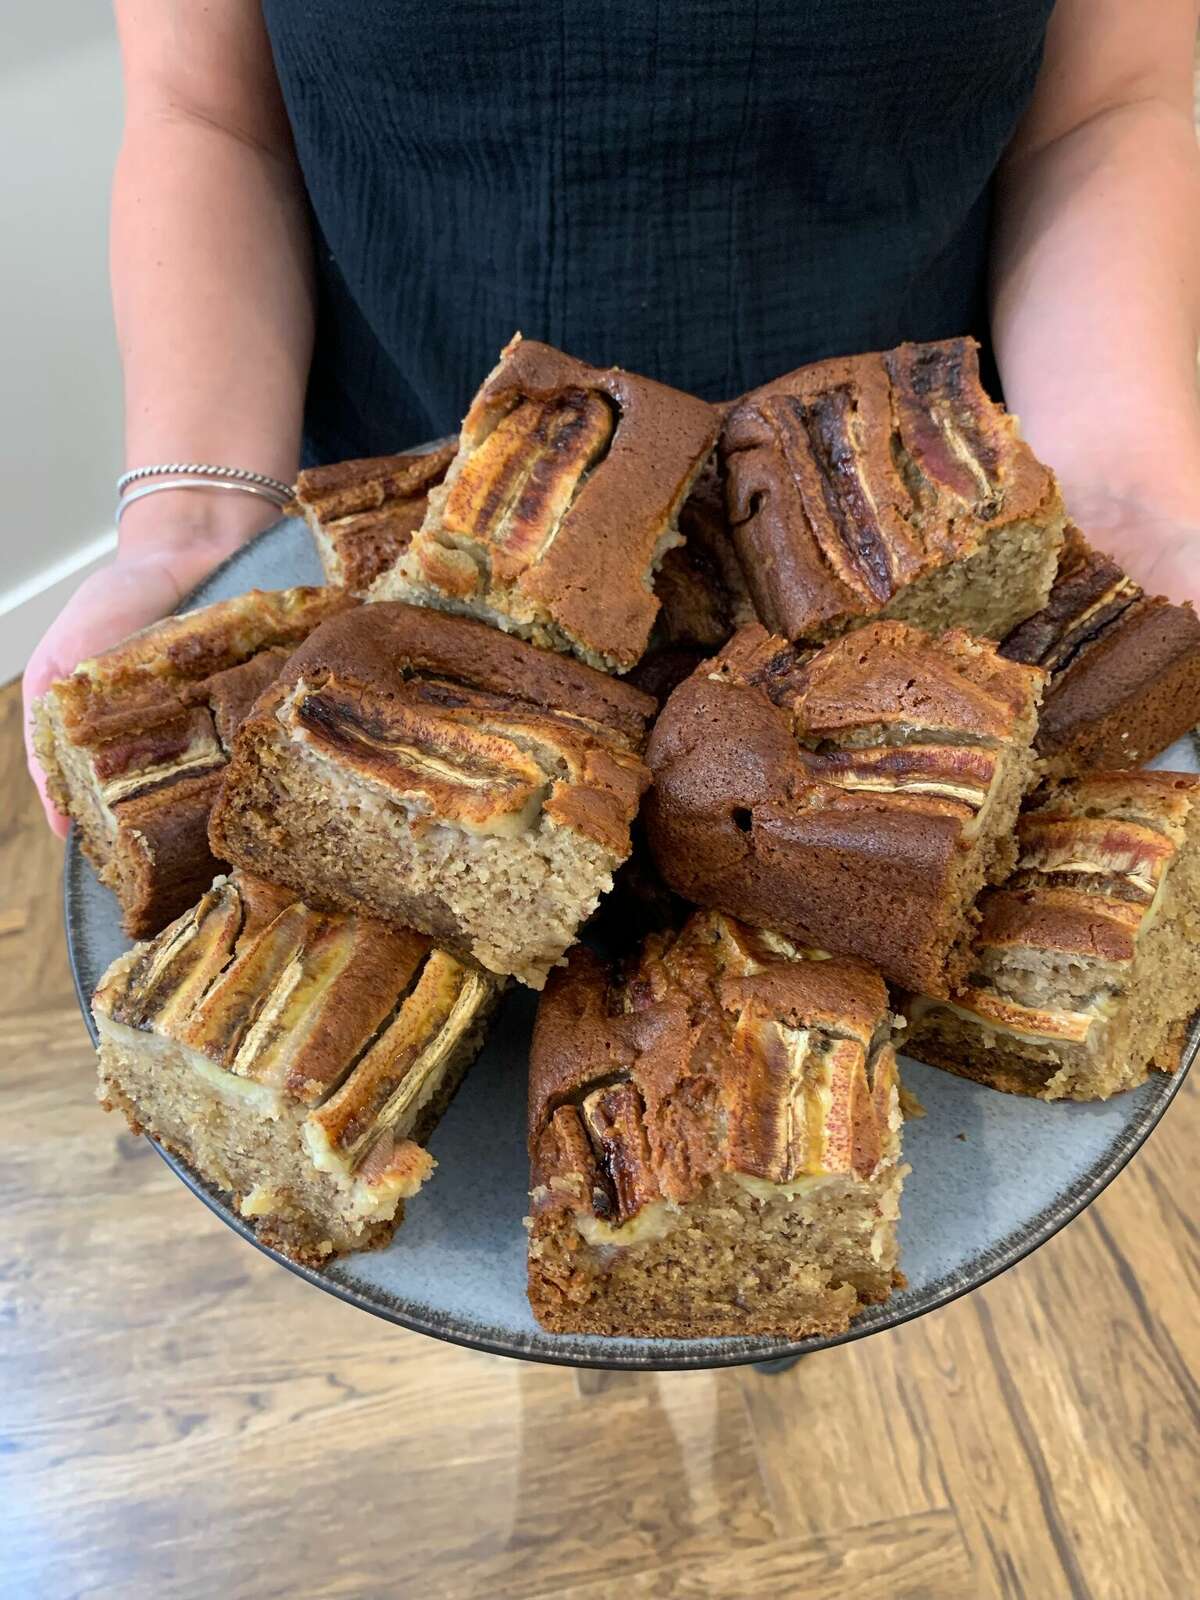 A tray of banana bread at Bloom Bake Shop in Hartford, which recently opened a storefront on Pratt Street.